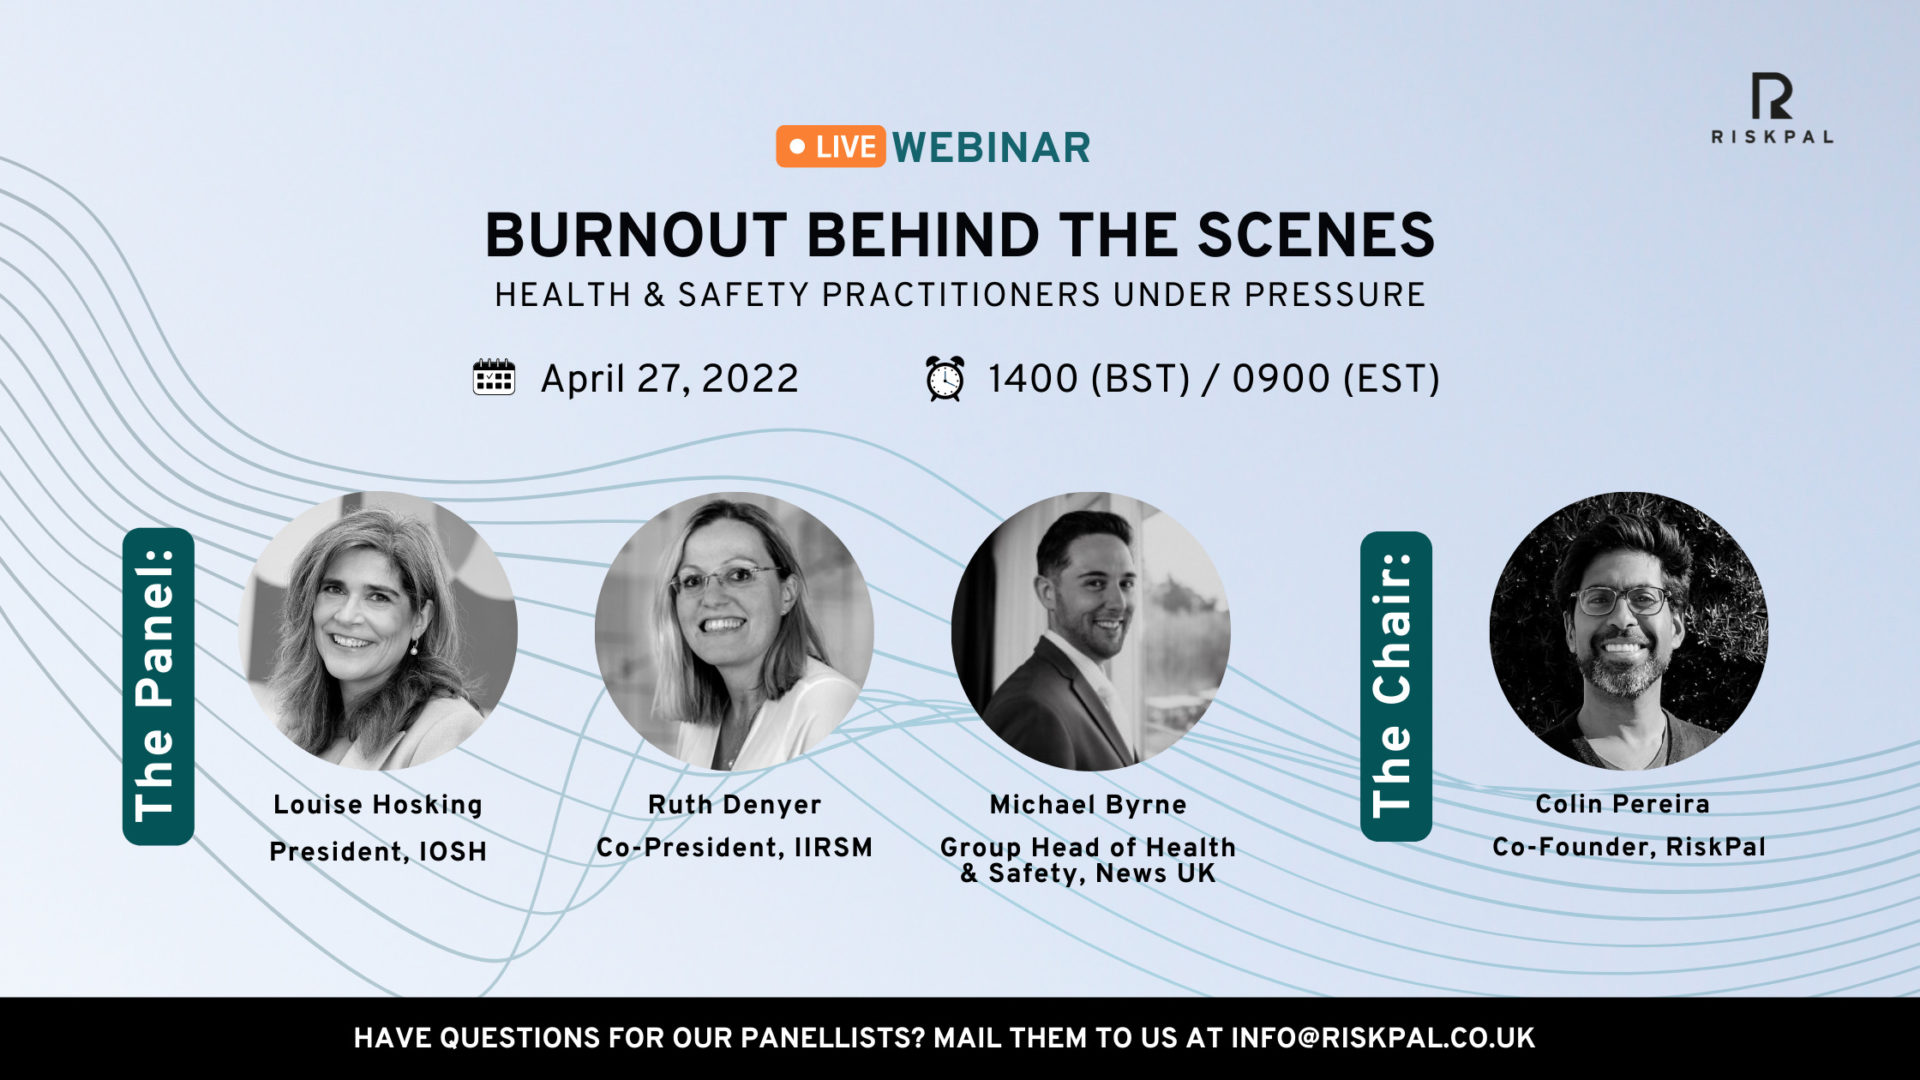 Burnout Behind the Scenes Webinar for Health & Safety Practitioners - RiskPal